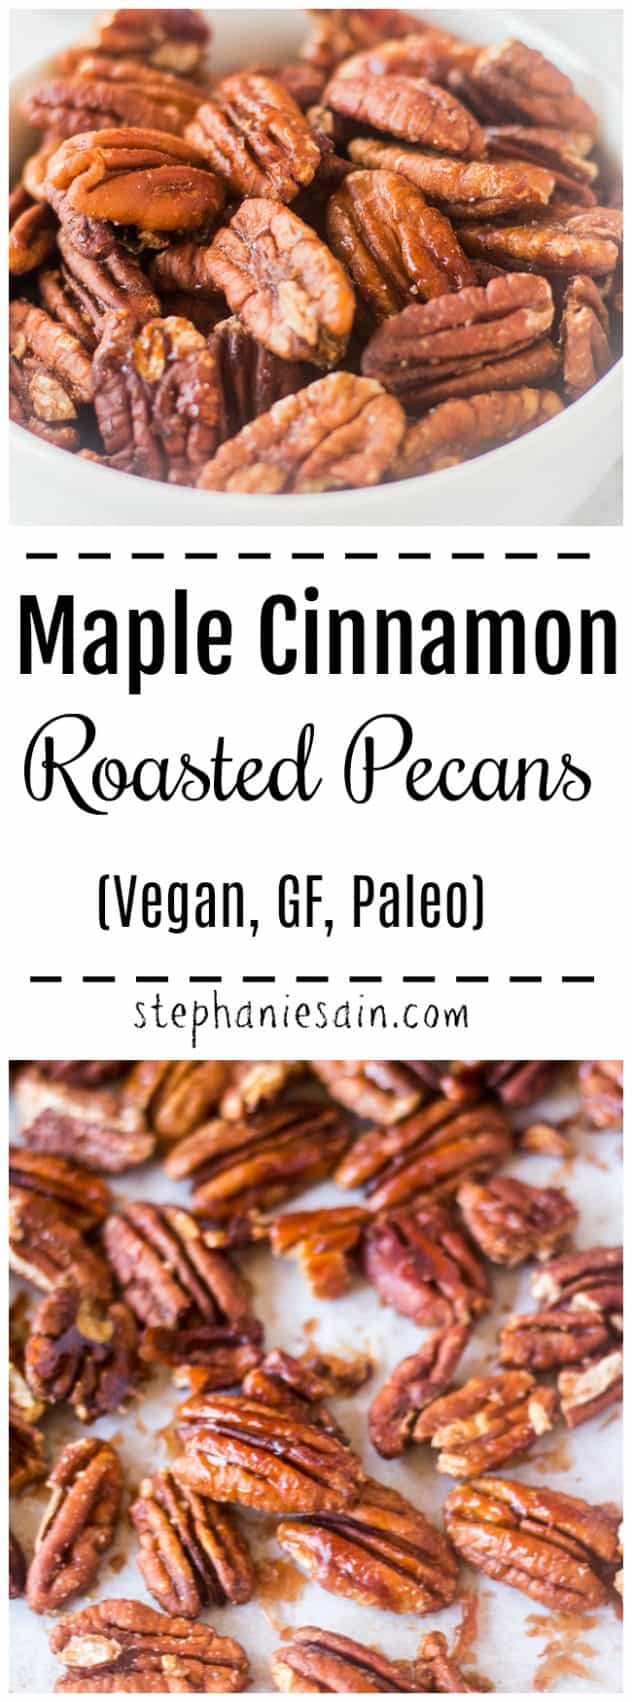 These Maple Cinnamon Roasted Pecans are made with only 4 ingredients and under 15 minutes. Great for snacks, holidays, & parties. Vegan, GF, Paleo, & No added refined sugar.